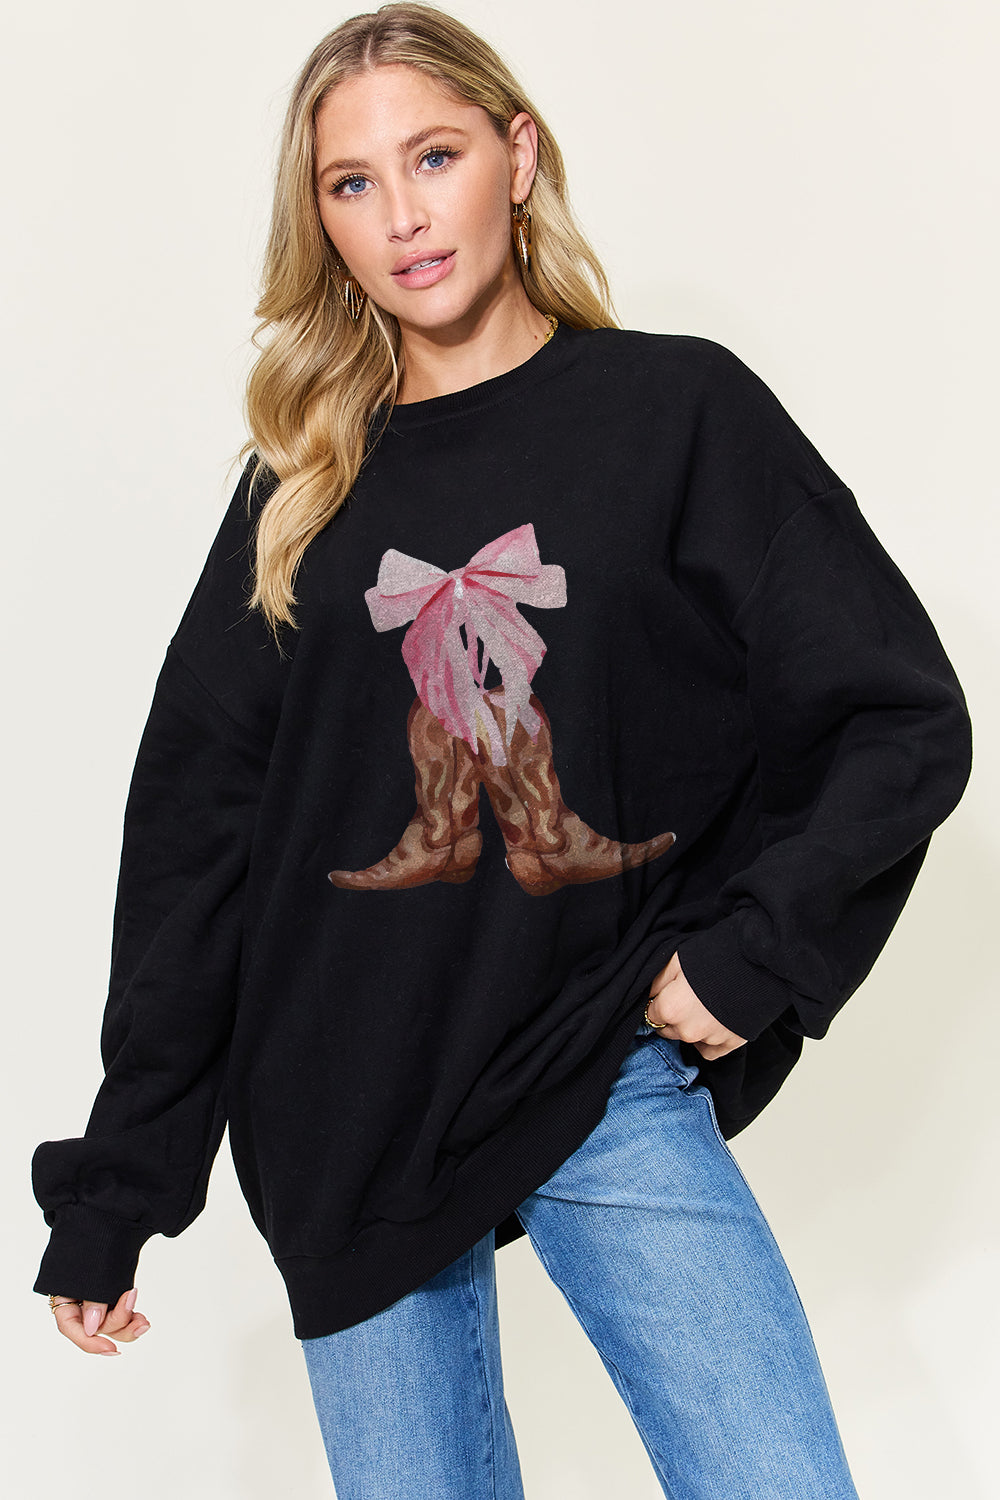 Simply Love Full Size Graphic Long Sleeve Sweatshirt free shipping -Oh Em Gee Boutique